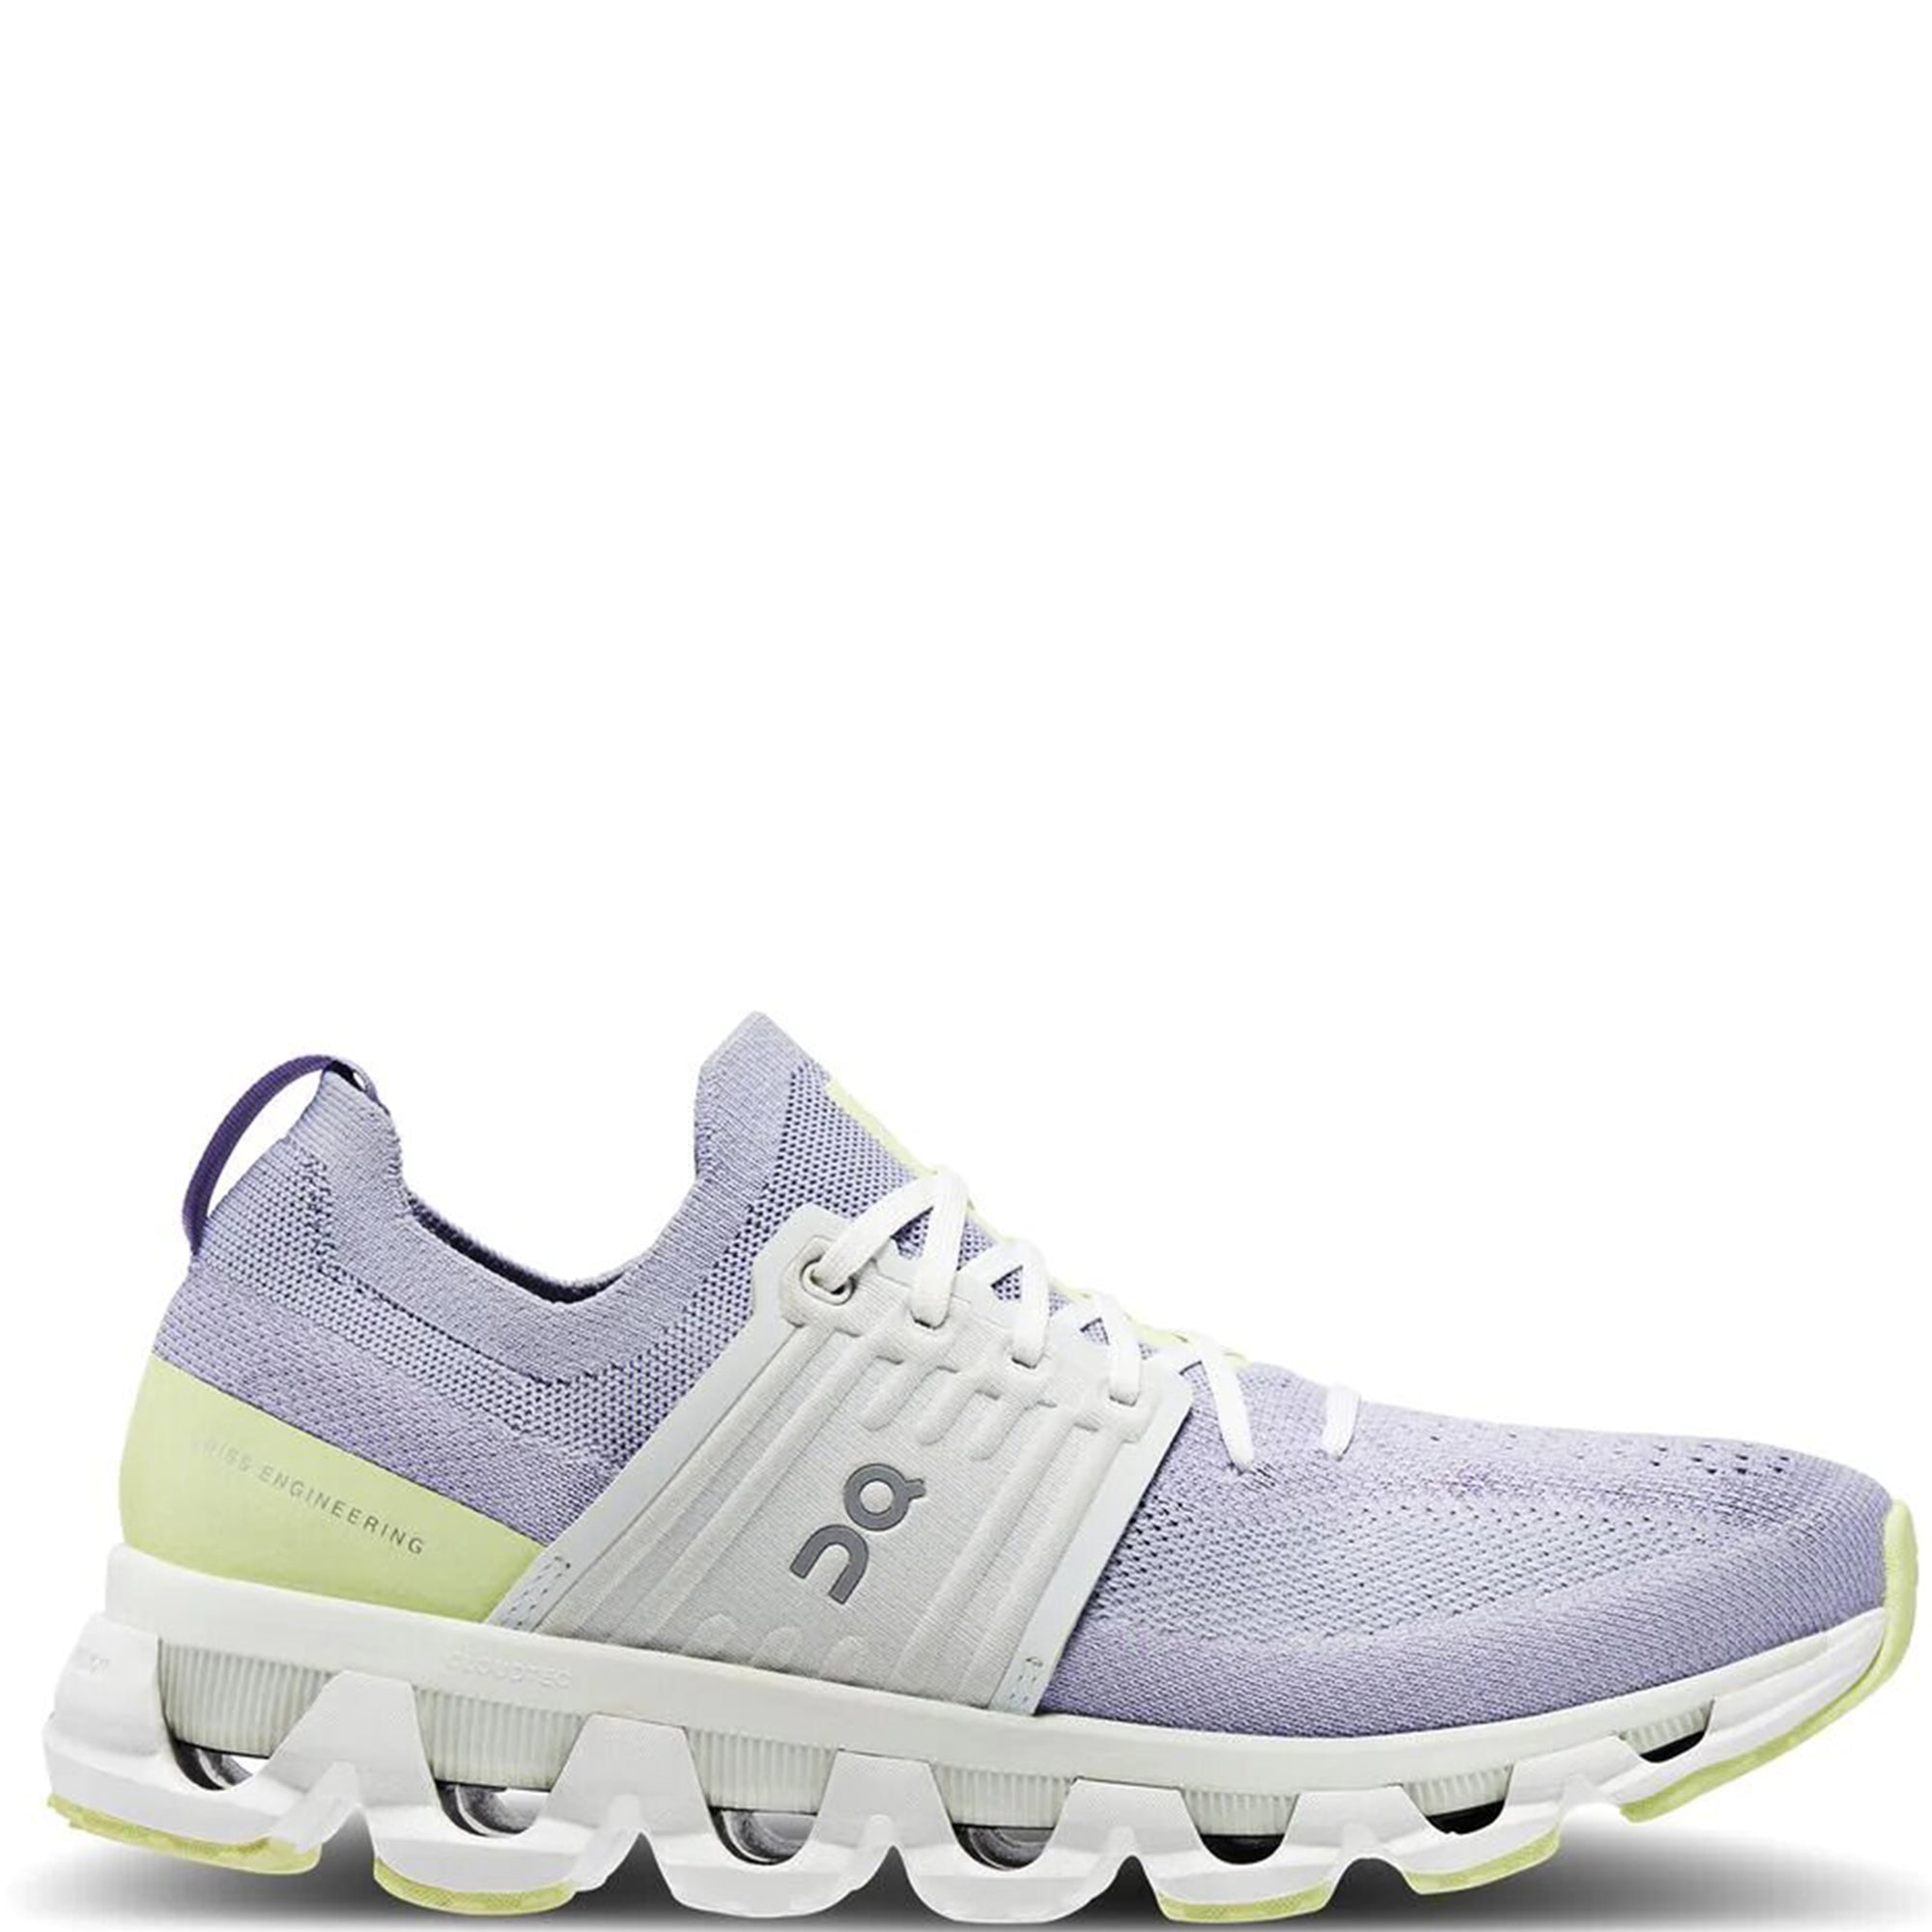 On Running Womens Cloudswift 3 Trainers Blue